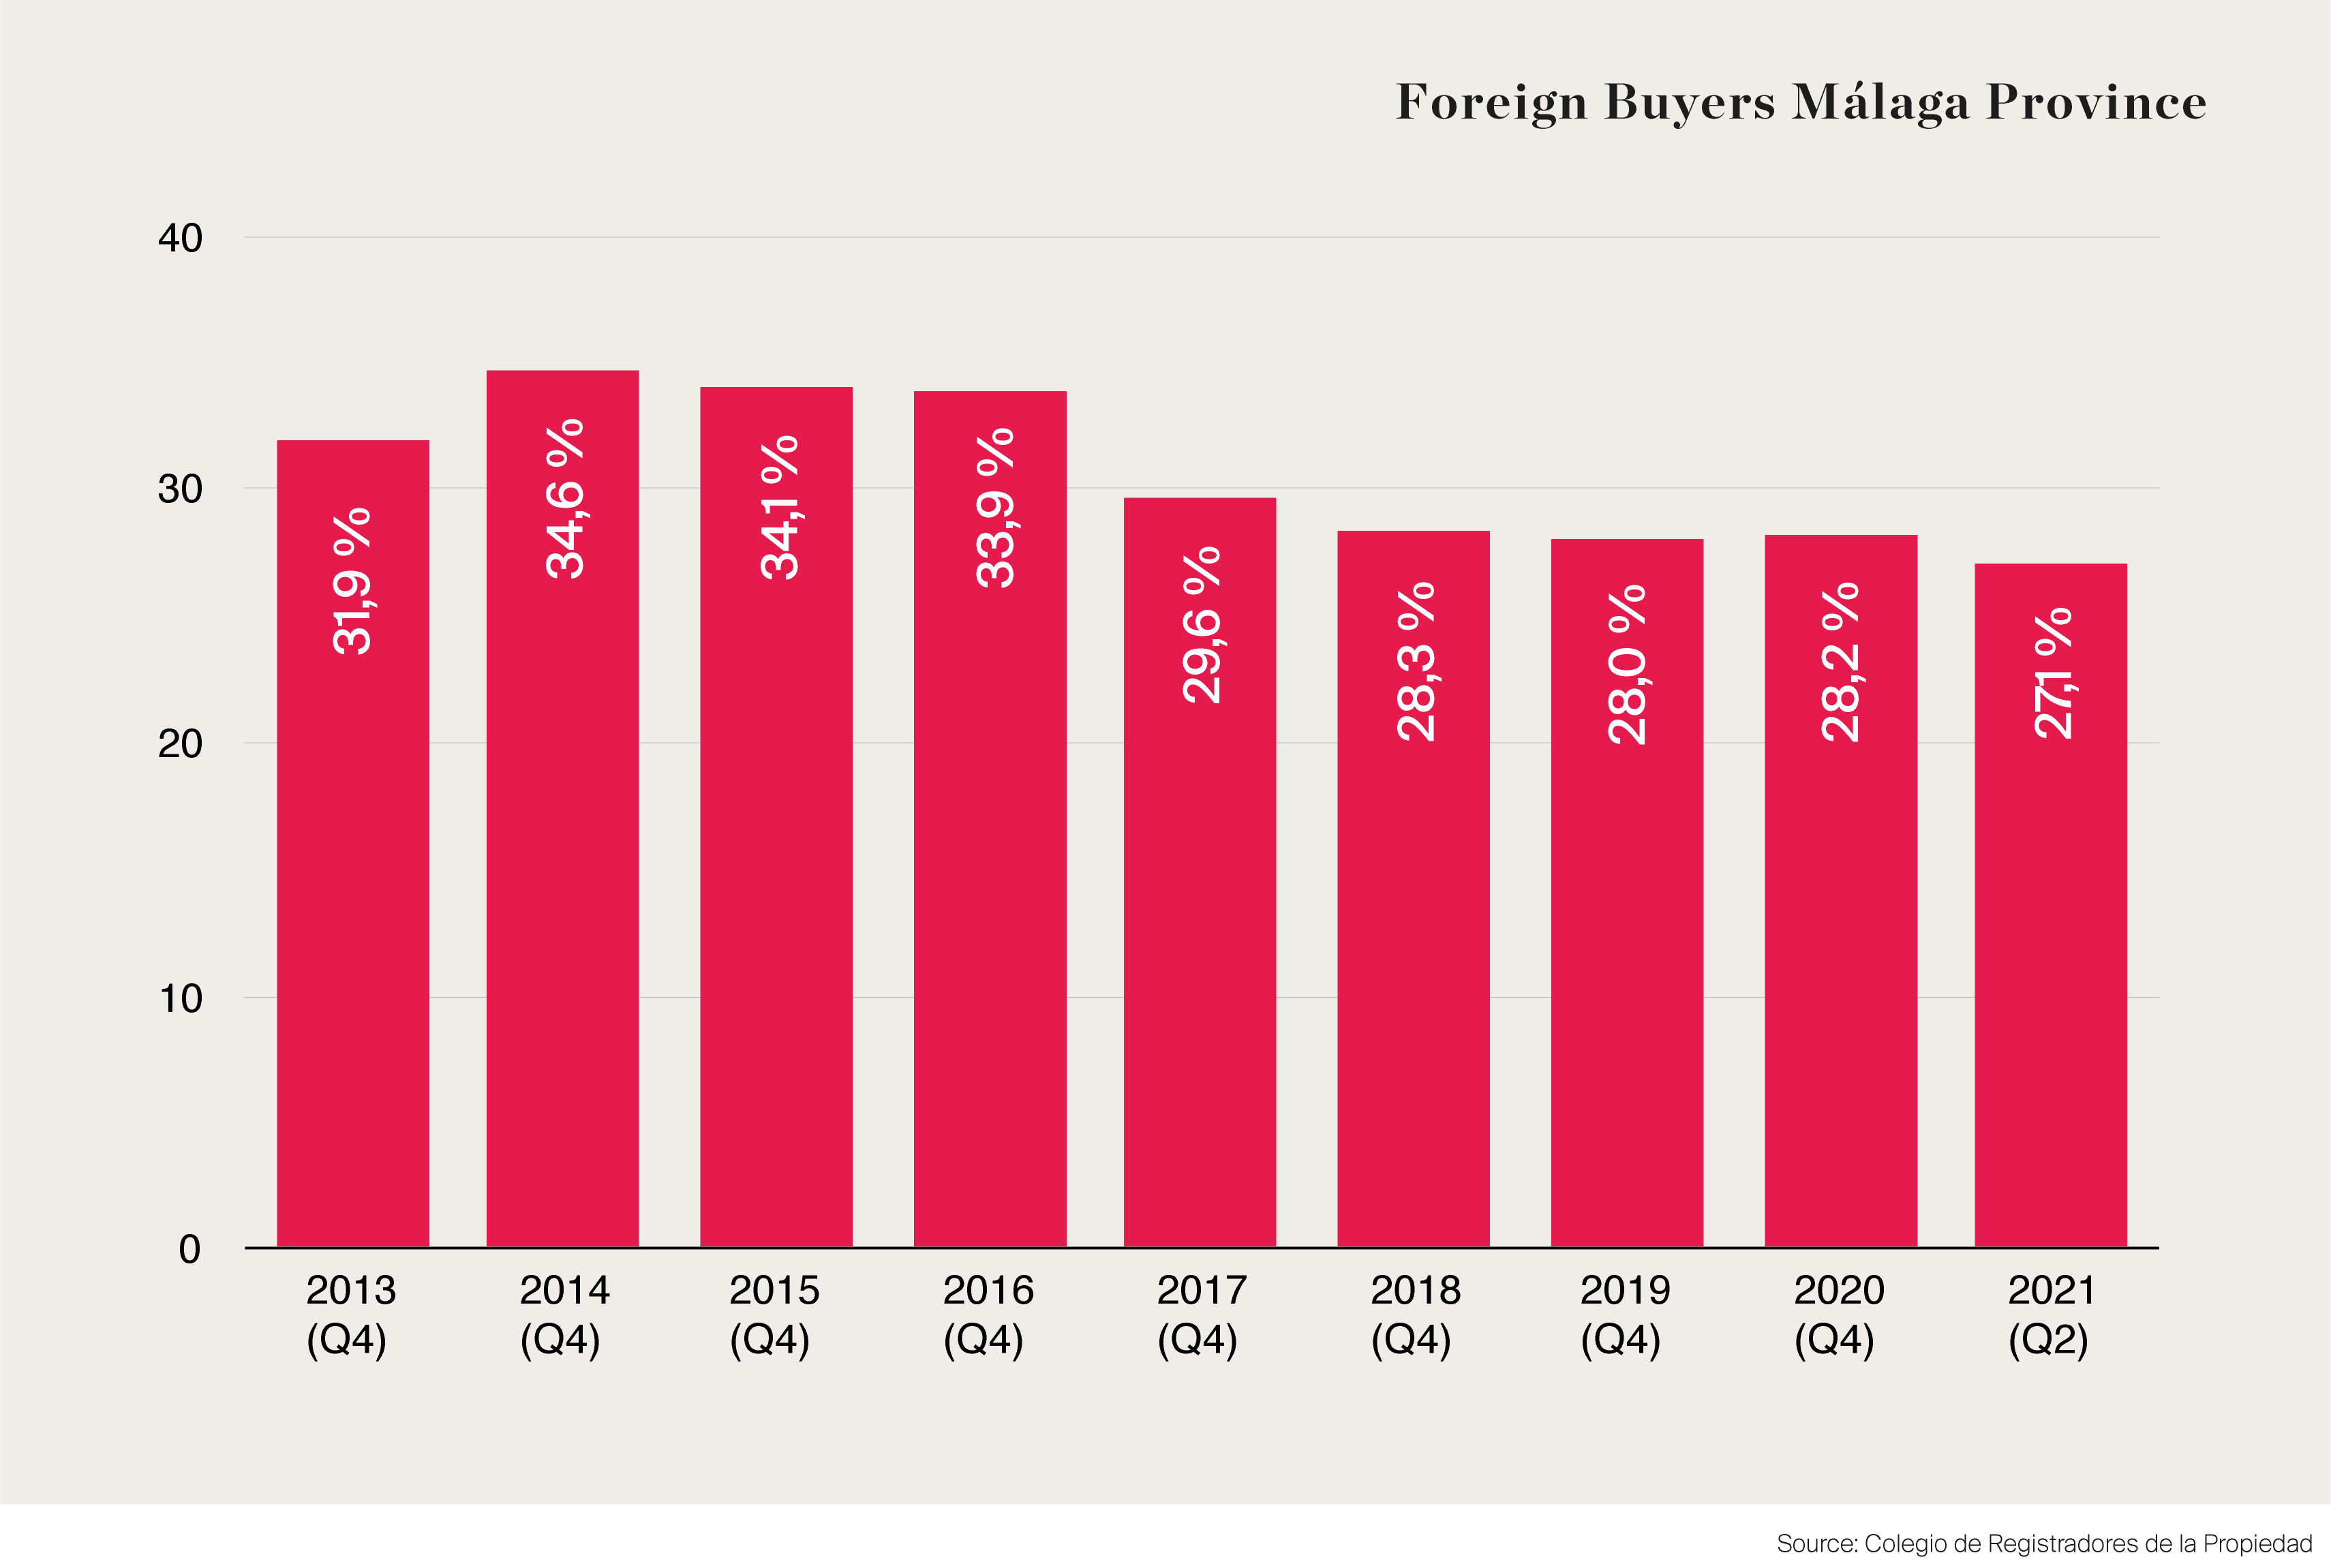 Porcentage Foreign buyers in Malaga province